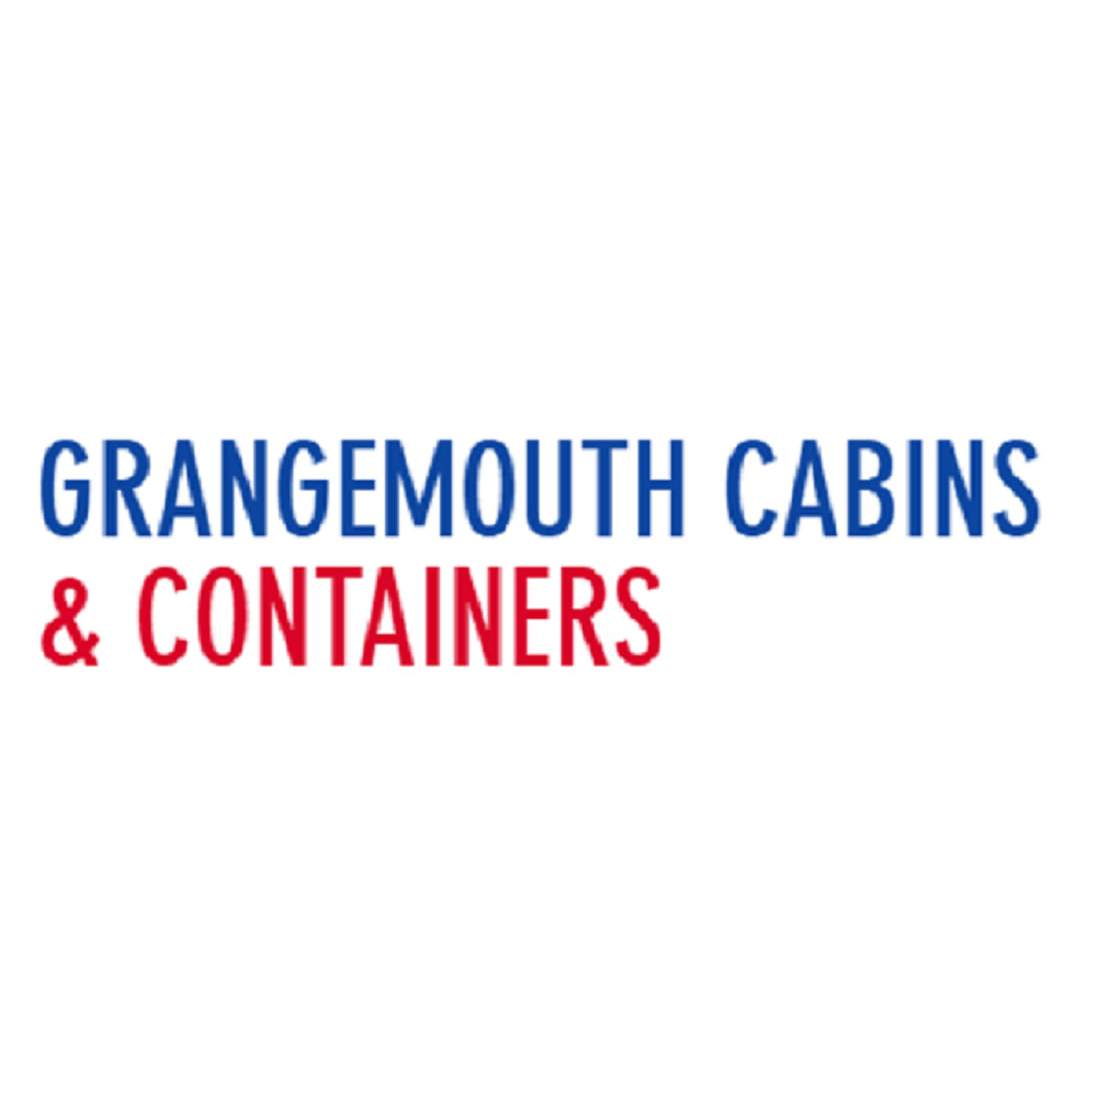 Grangemouth Cabins & Containers Ltd - Grangemouth, Stirlingshire FK3 8LS - 07775 800360 | ShowMeLocal.com